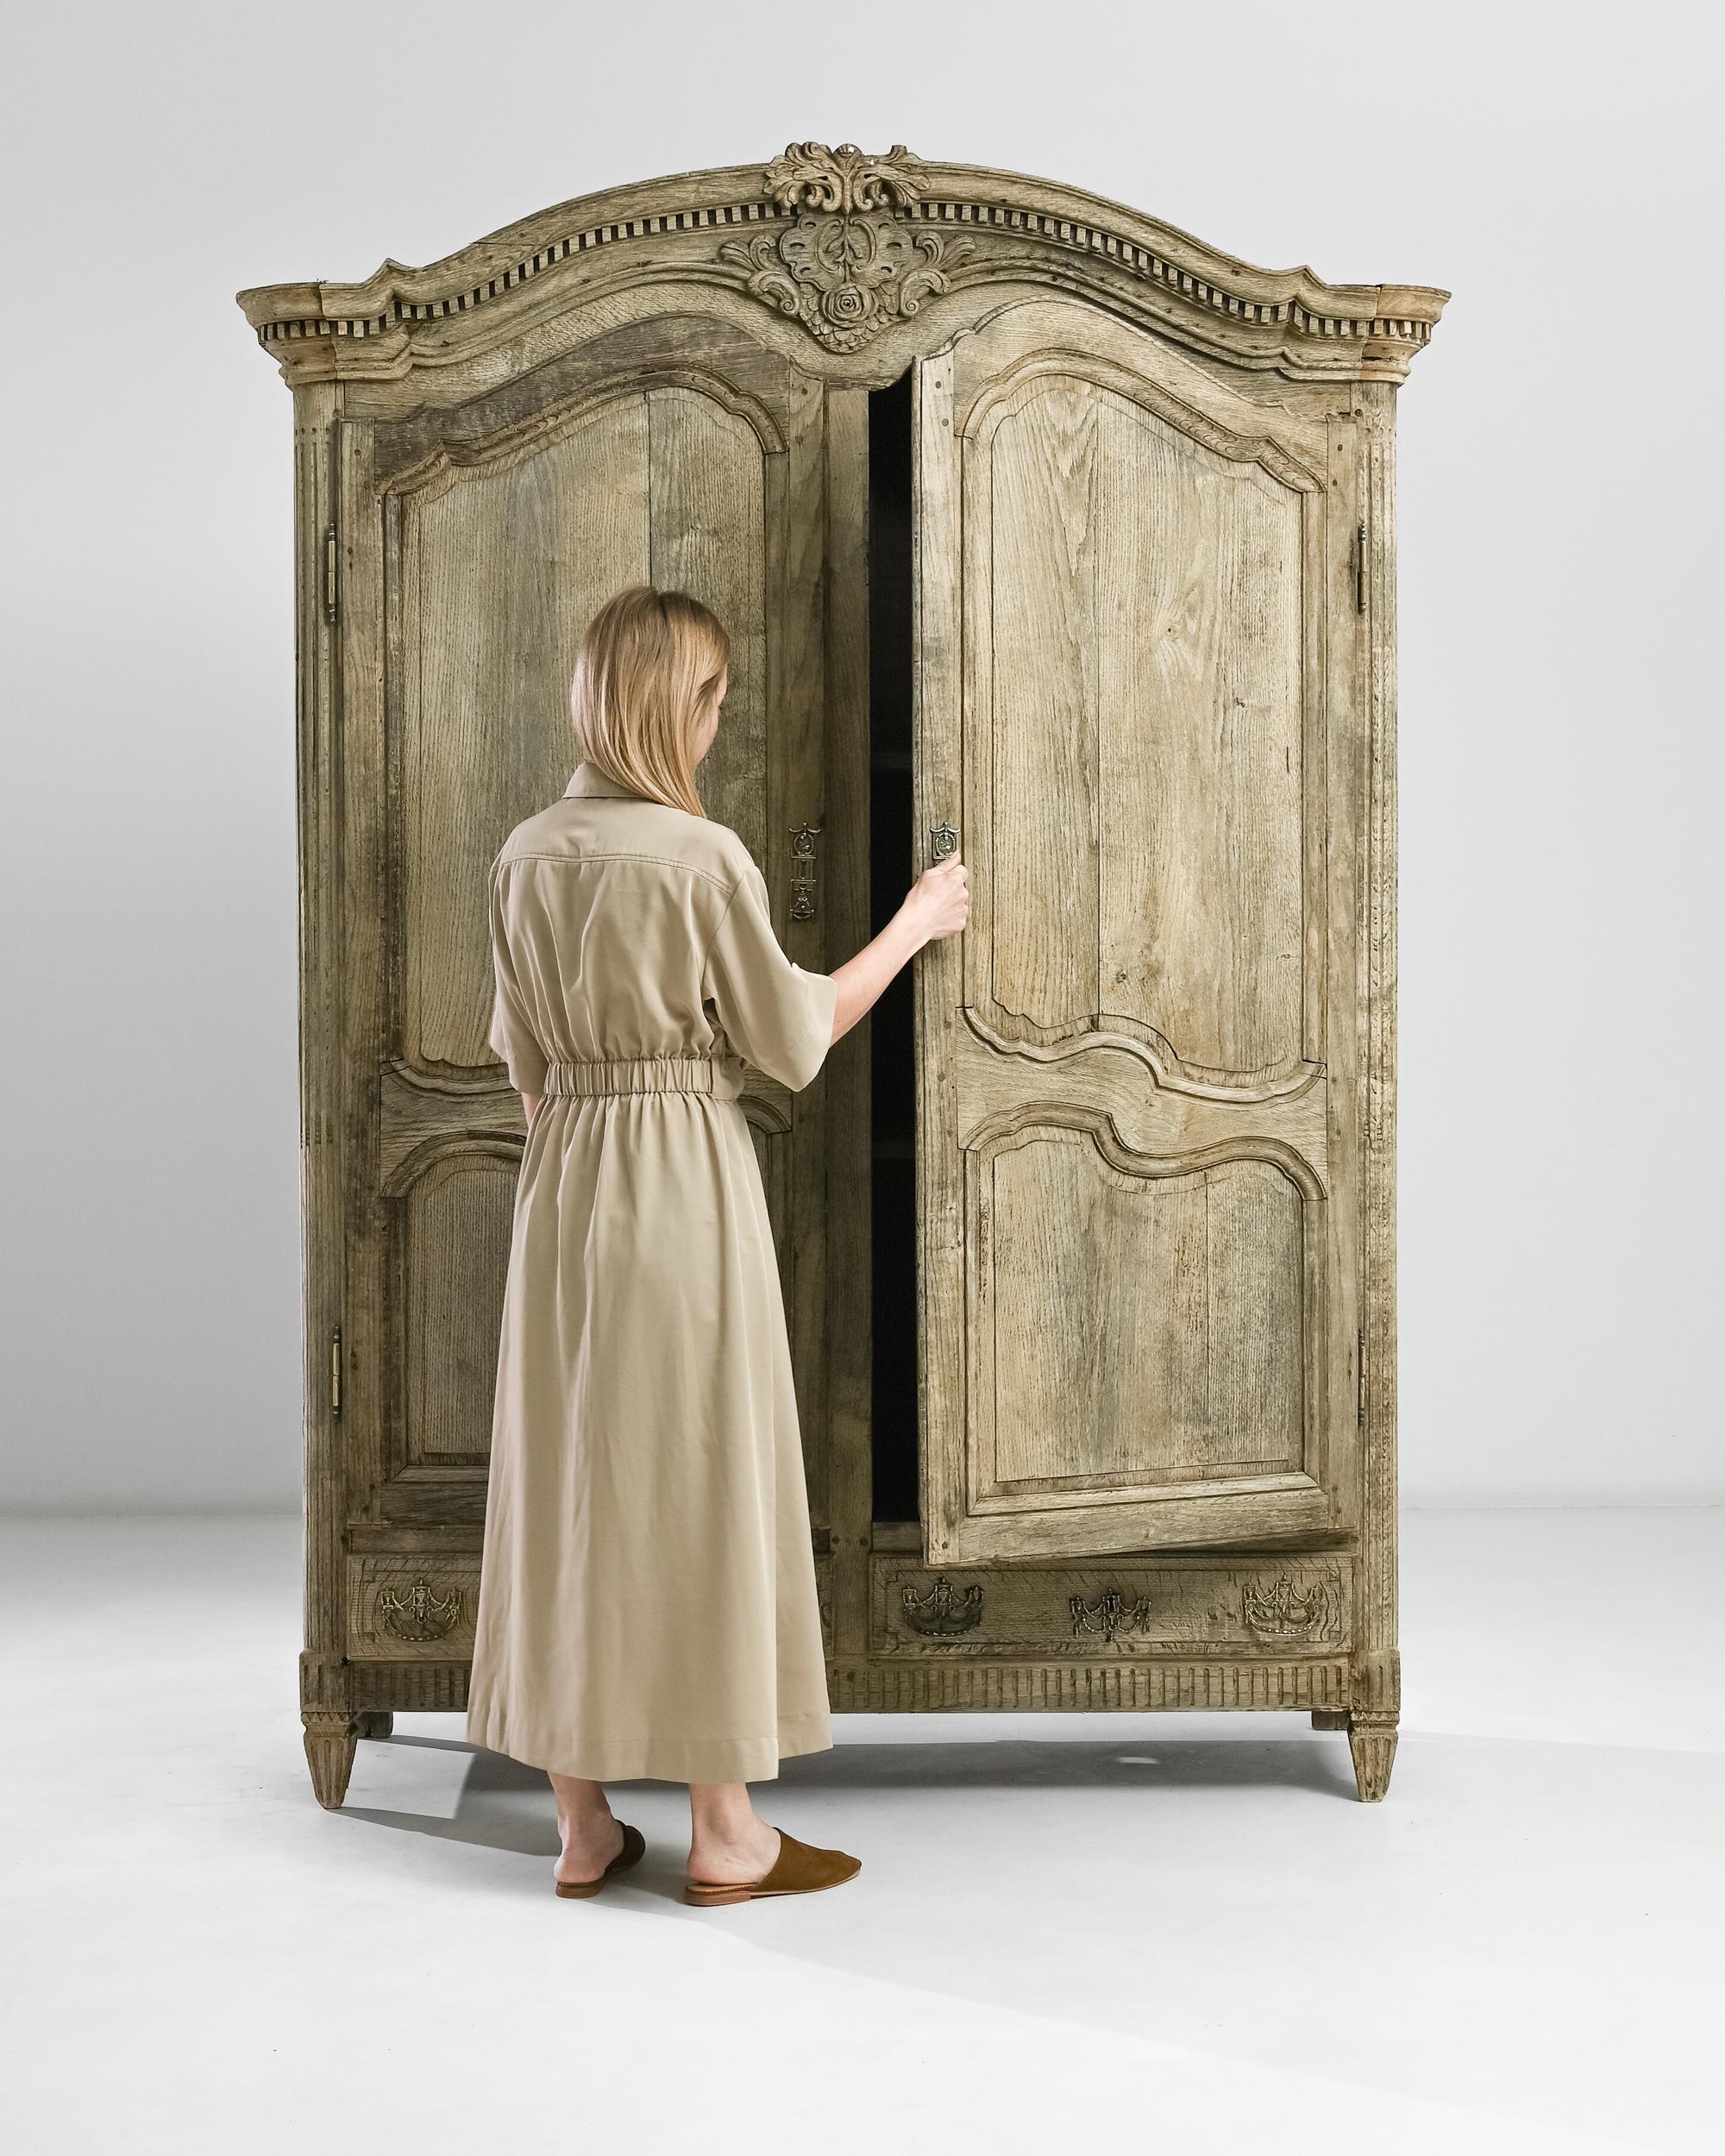 This elegant 19th century armoire is alive with refined French Rococo elements. The central molding flaunts a masterfully carved rosette surrounded by decorative fish scales, rich foliage and scrolls reminiscent of sea waves. The door locks